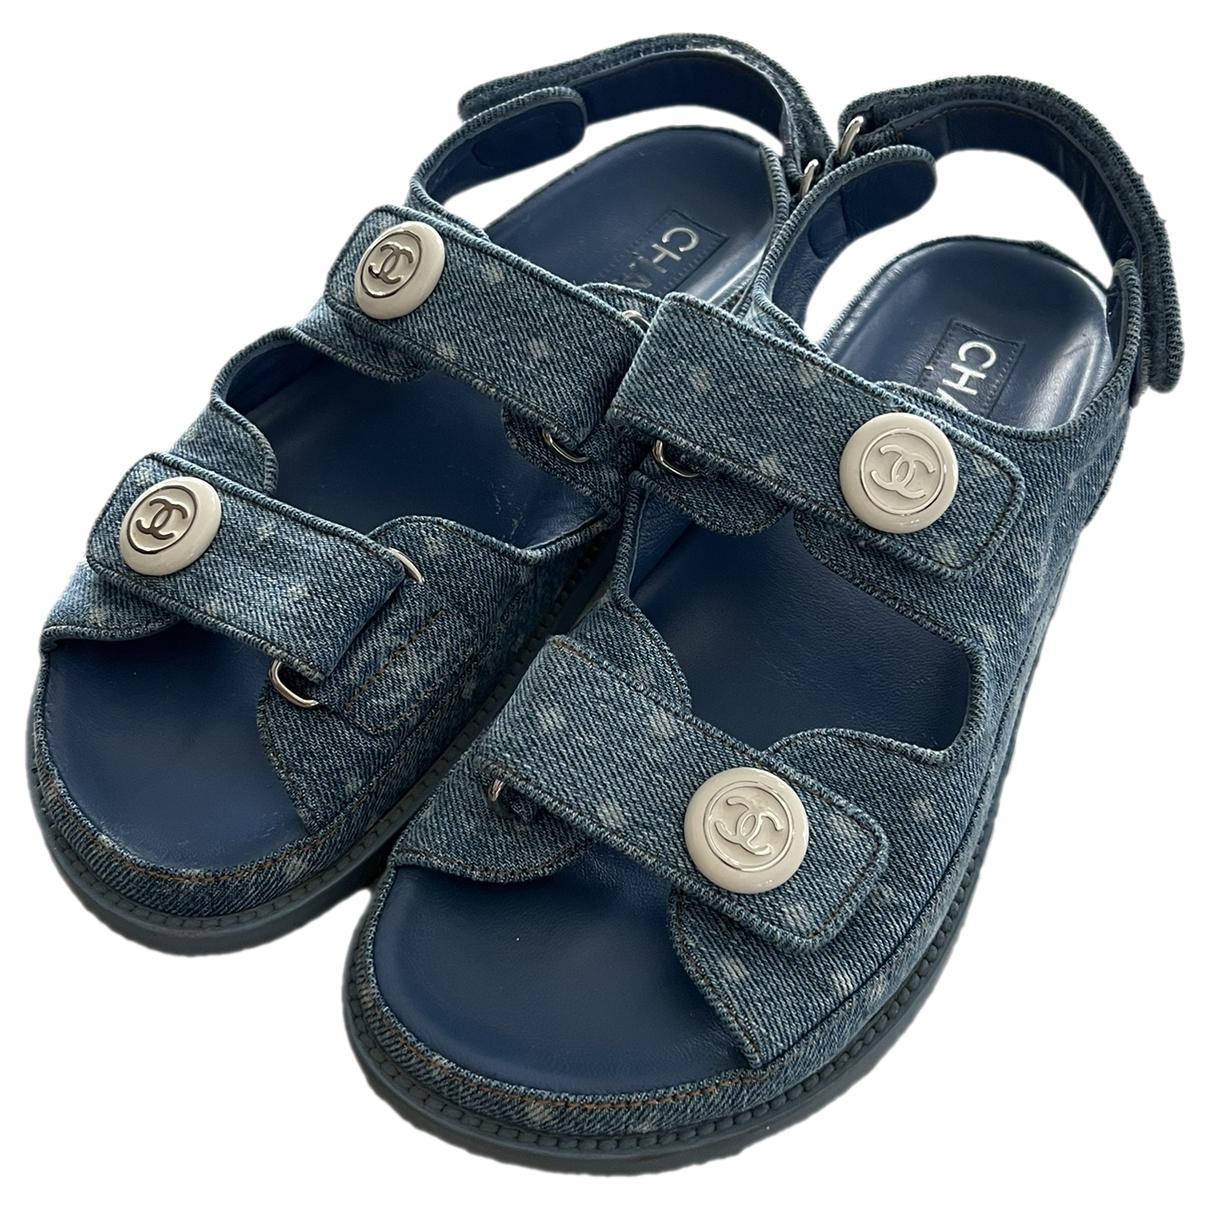 Dad sandals leather sandals Chanel Blue size 37 EU in Leather - 34594224